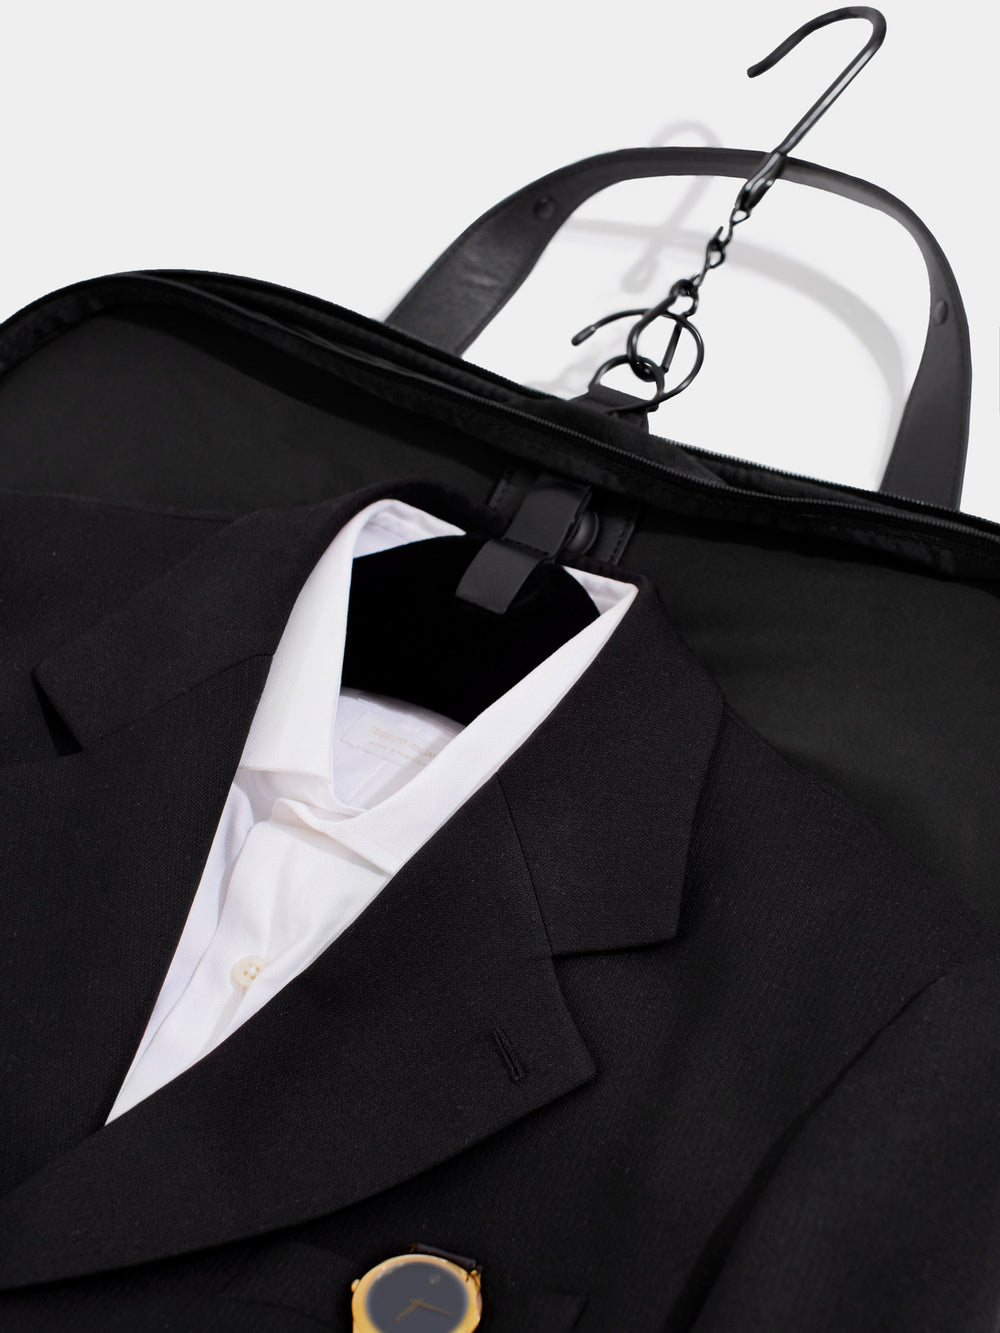 c35 garment bag in black nylon open with suit and shirt visible